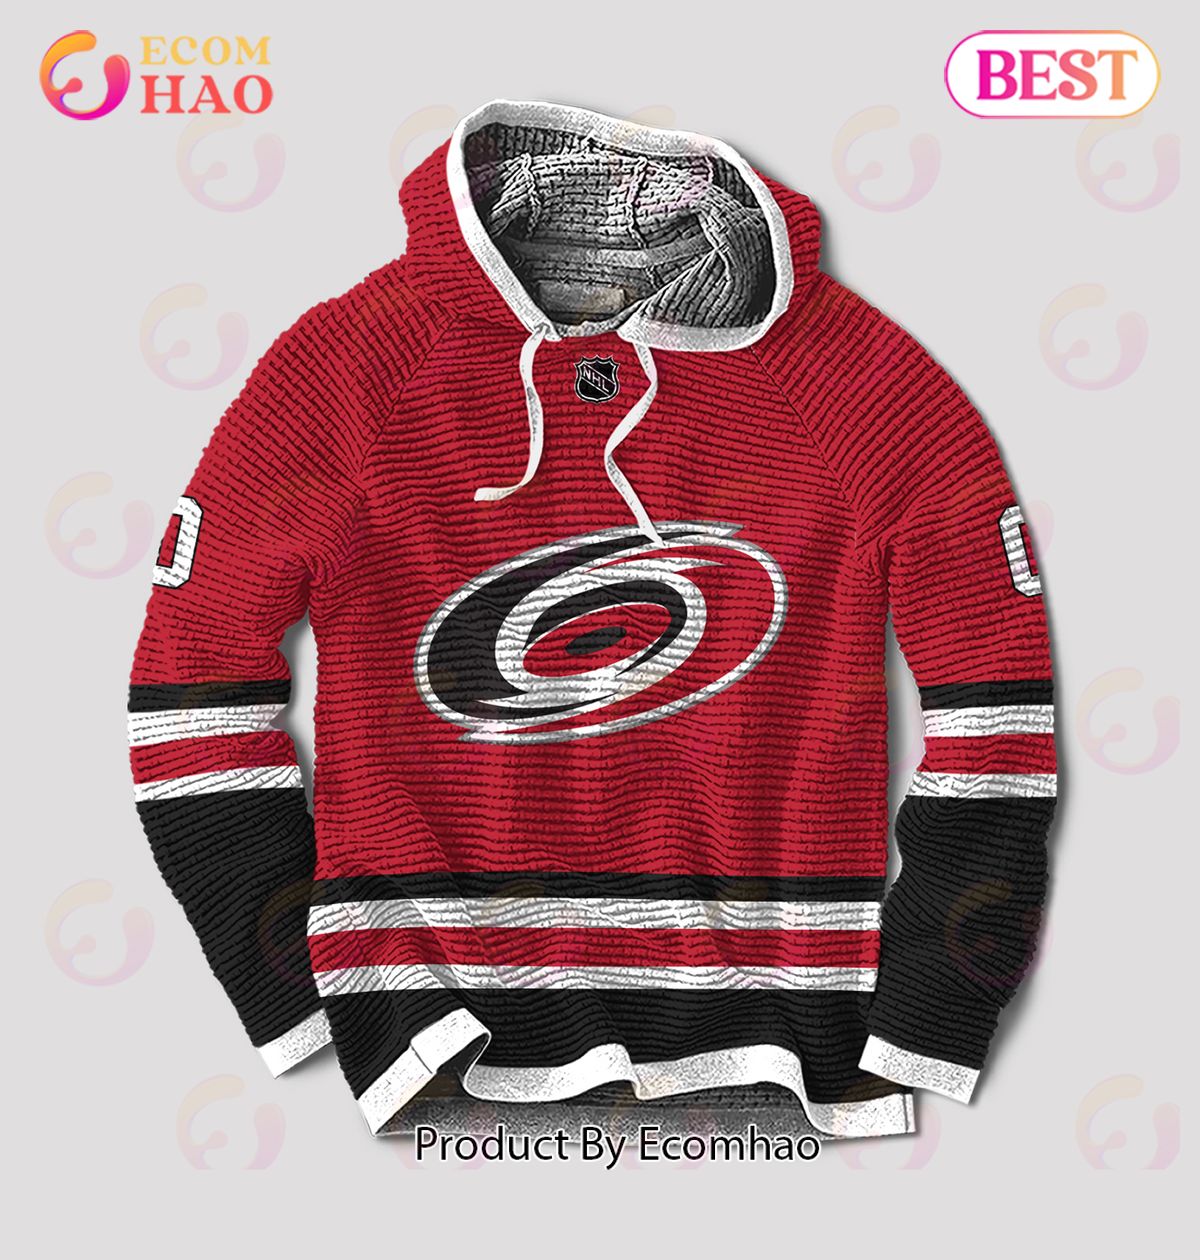 NHL Carolina Hurricanes Limited Edition Personalized 3D Hoodie Full Printing